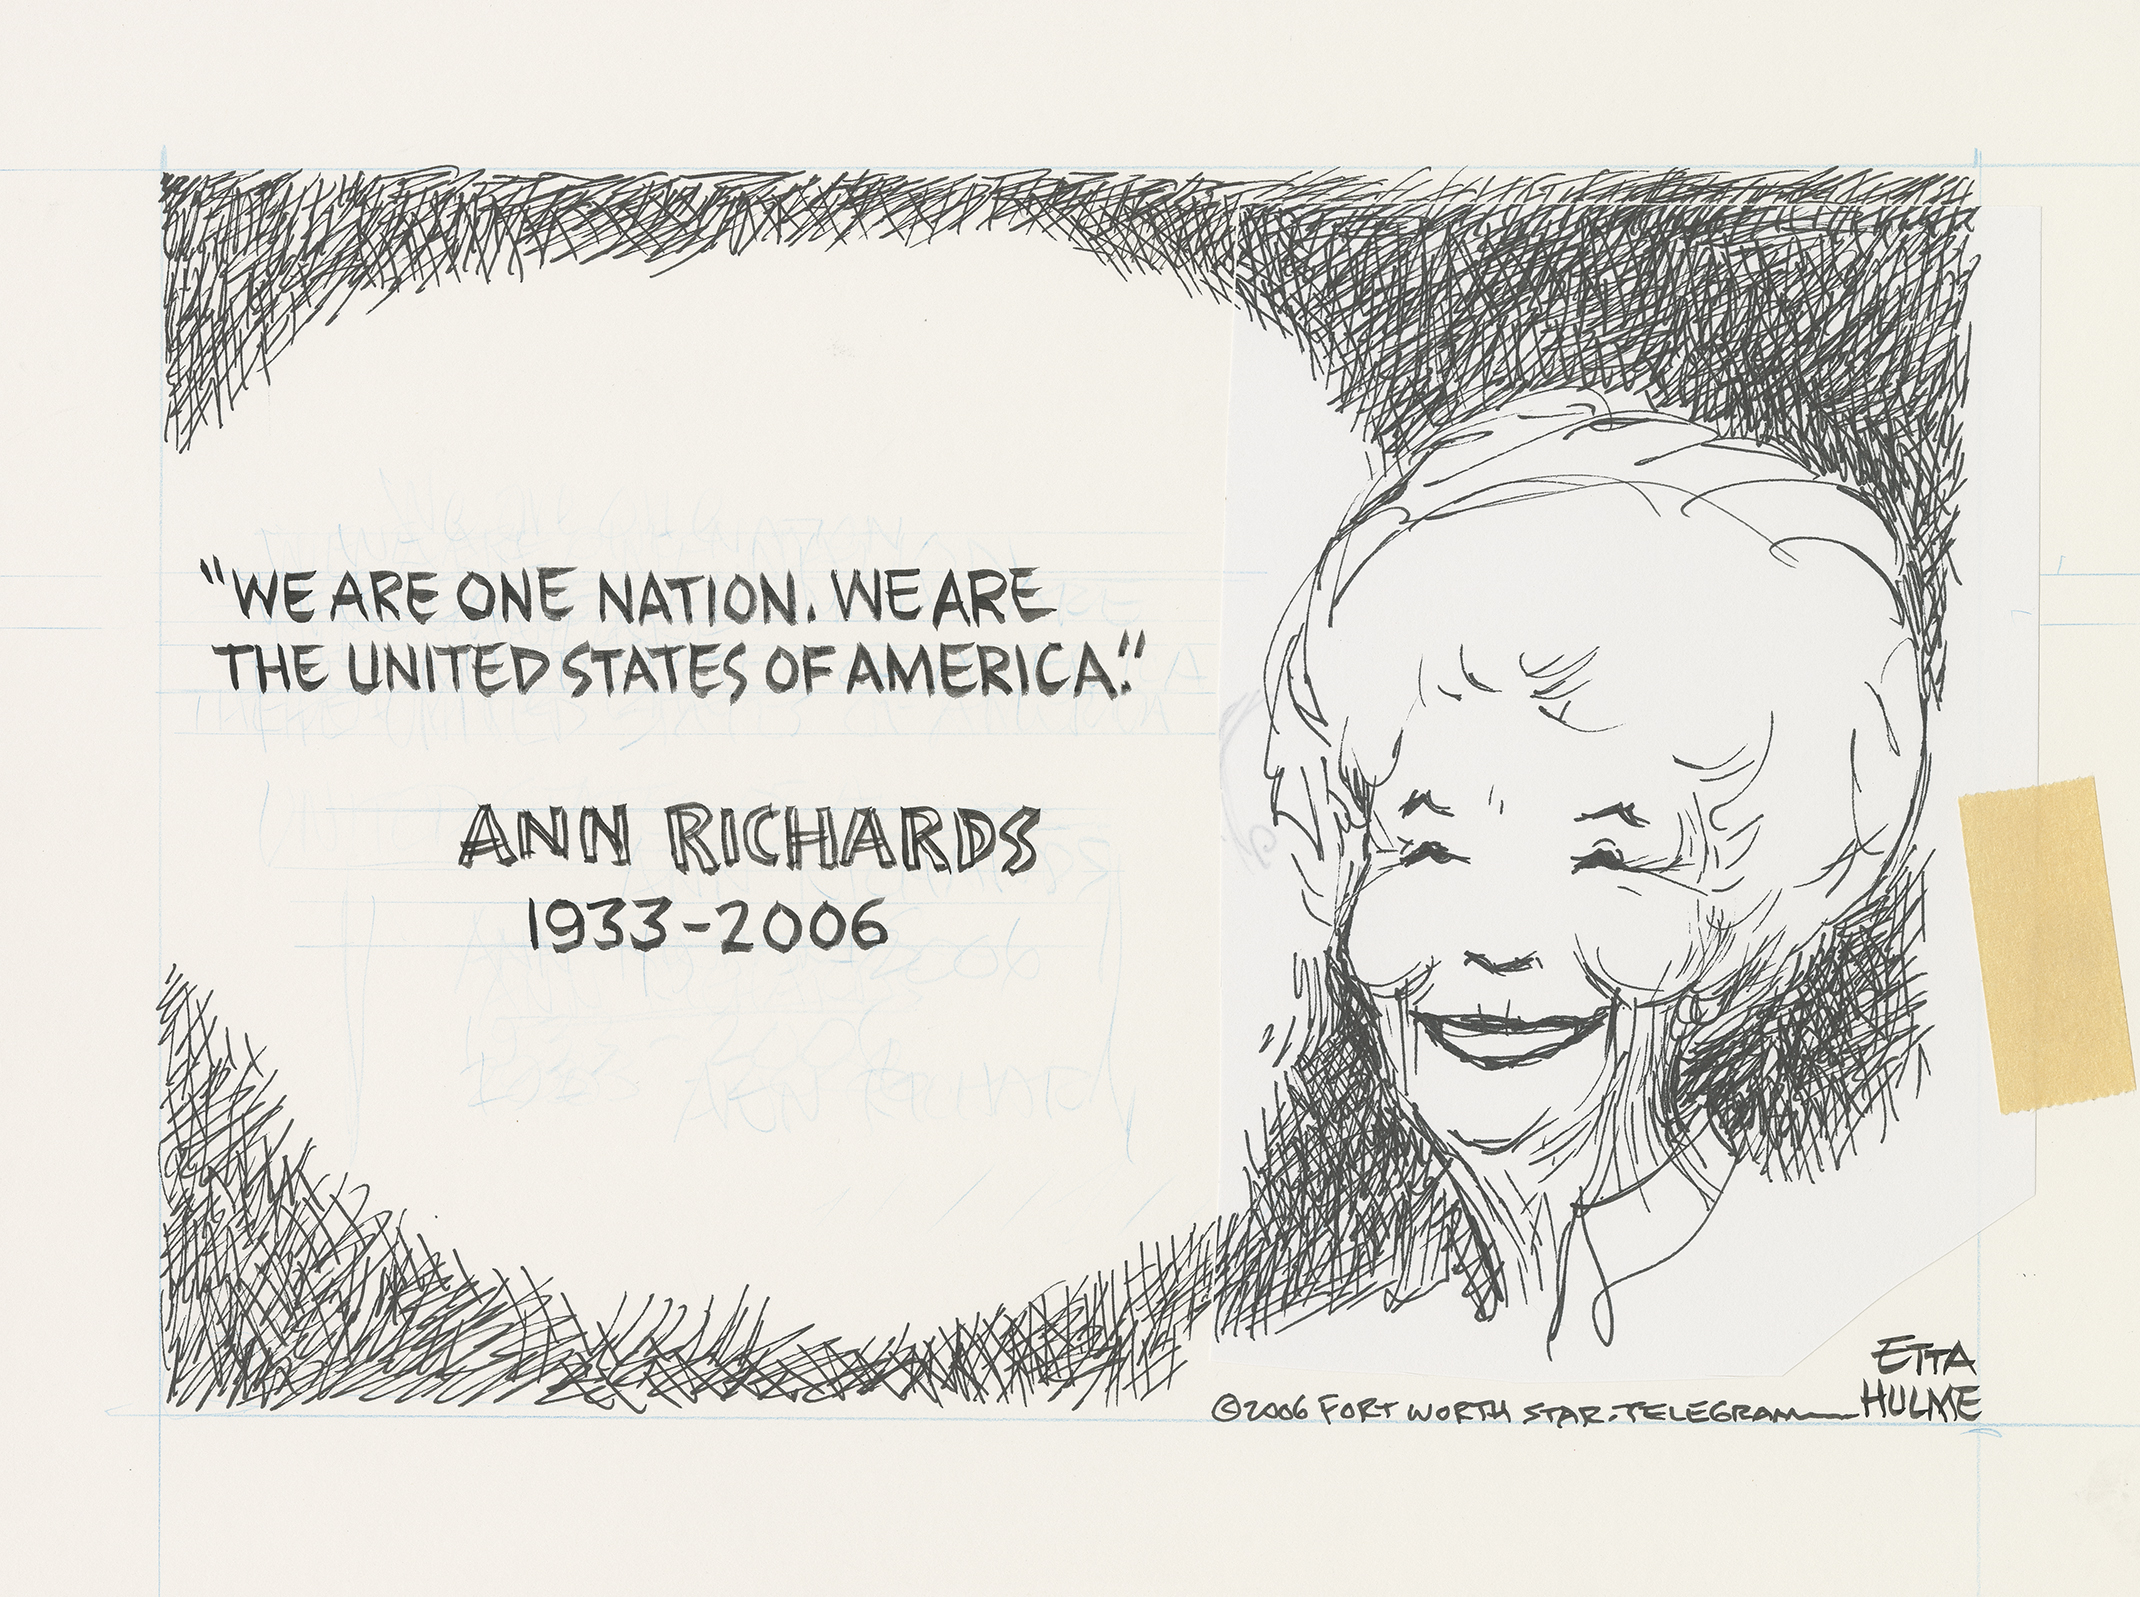 Hand-drawn image illustrating Ann Richards. Written under her name is "1933-2006". Written above her name is a quote, "We are one nation. We are the United States of America".